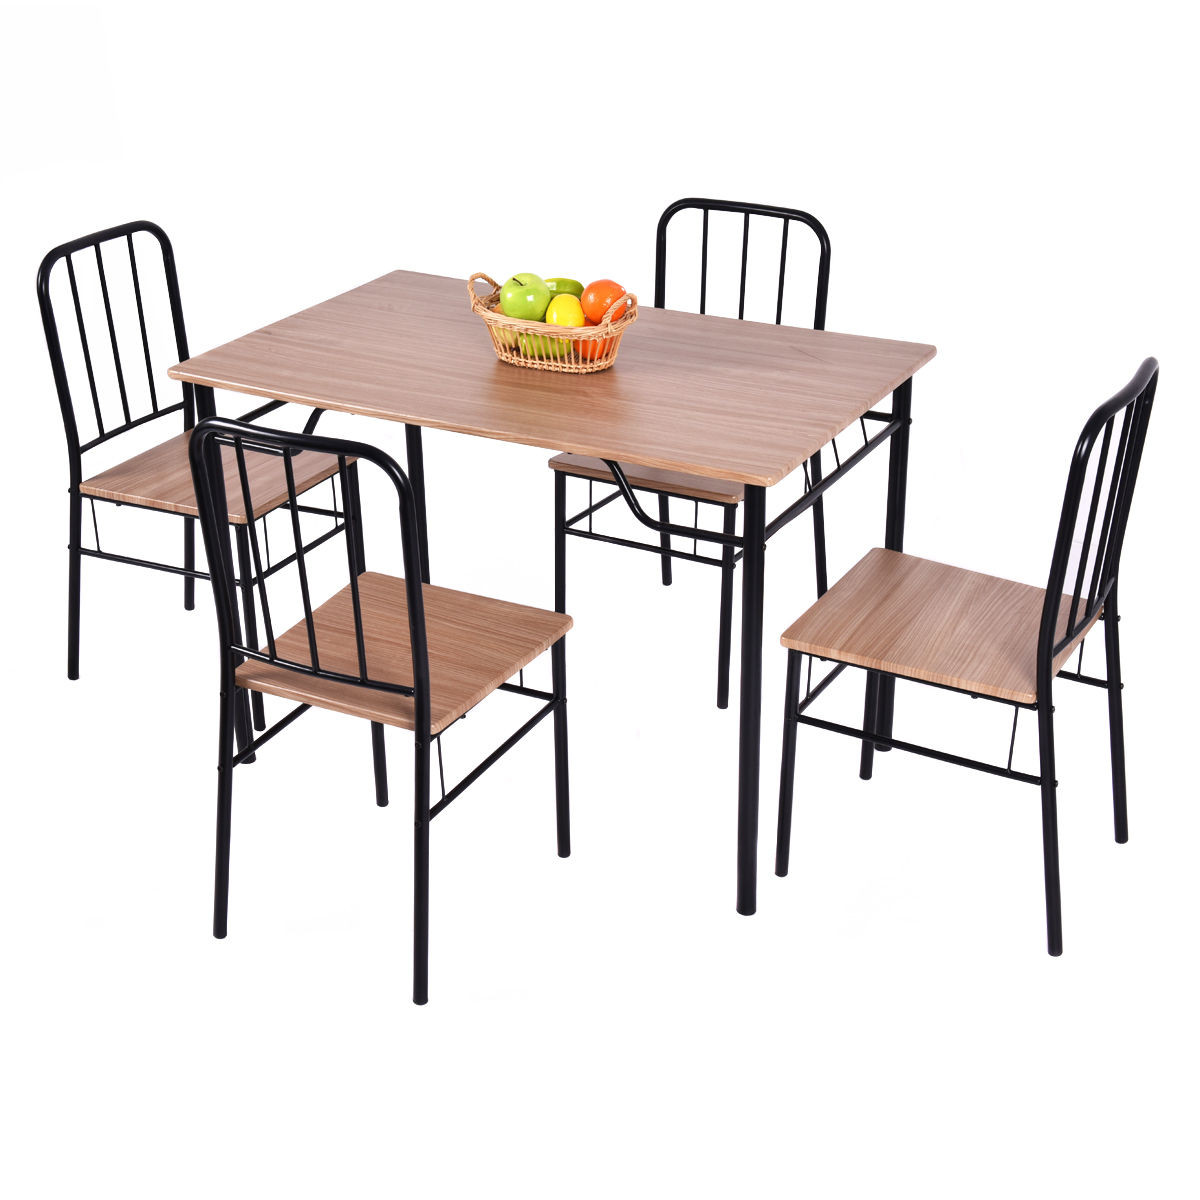 5 Pcs Dining Set Table And 4 Chairs